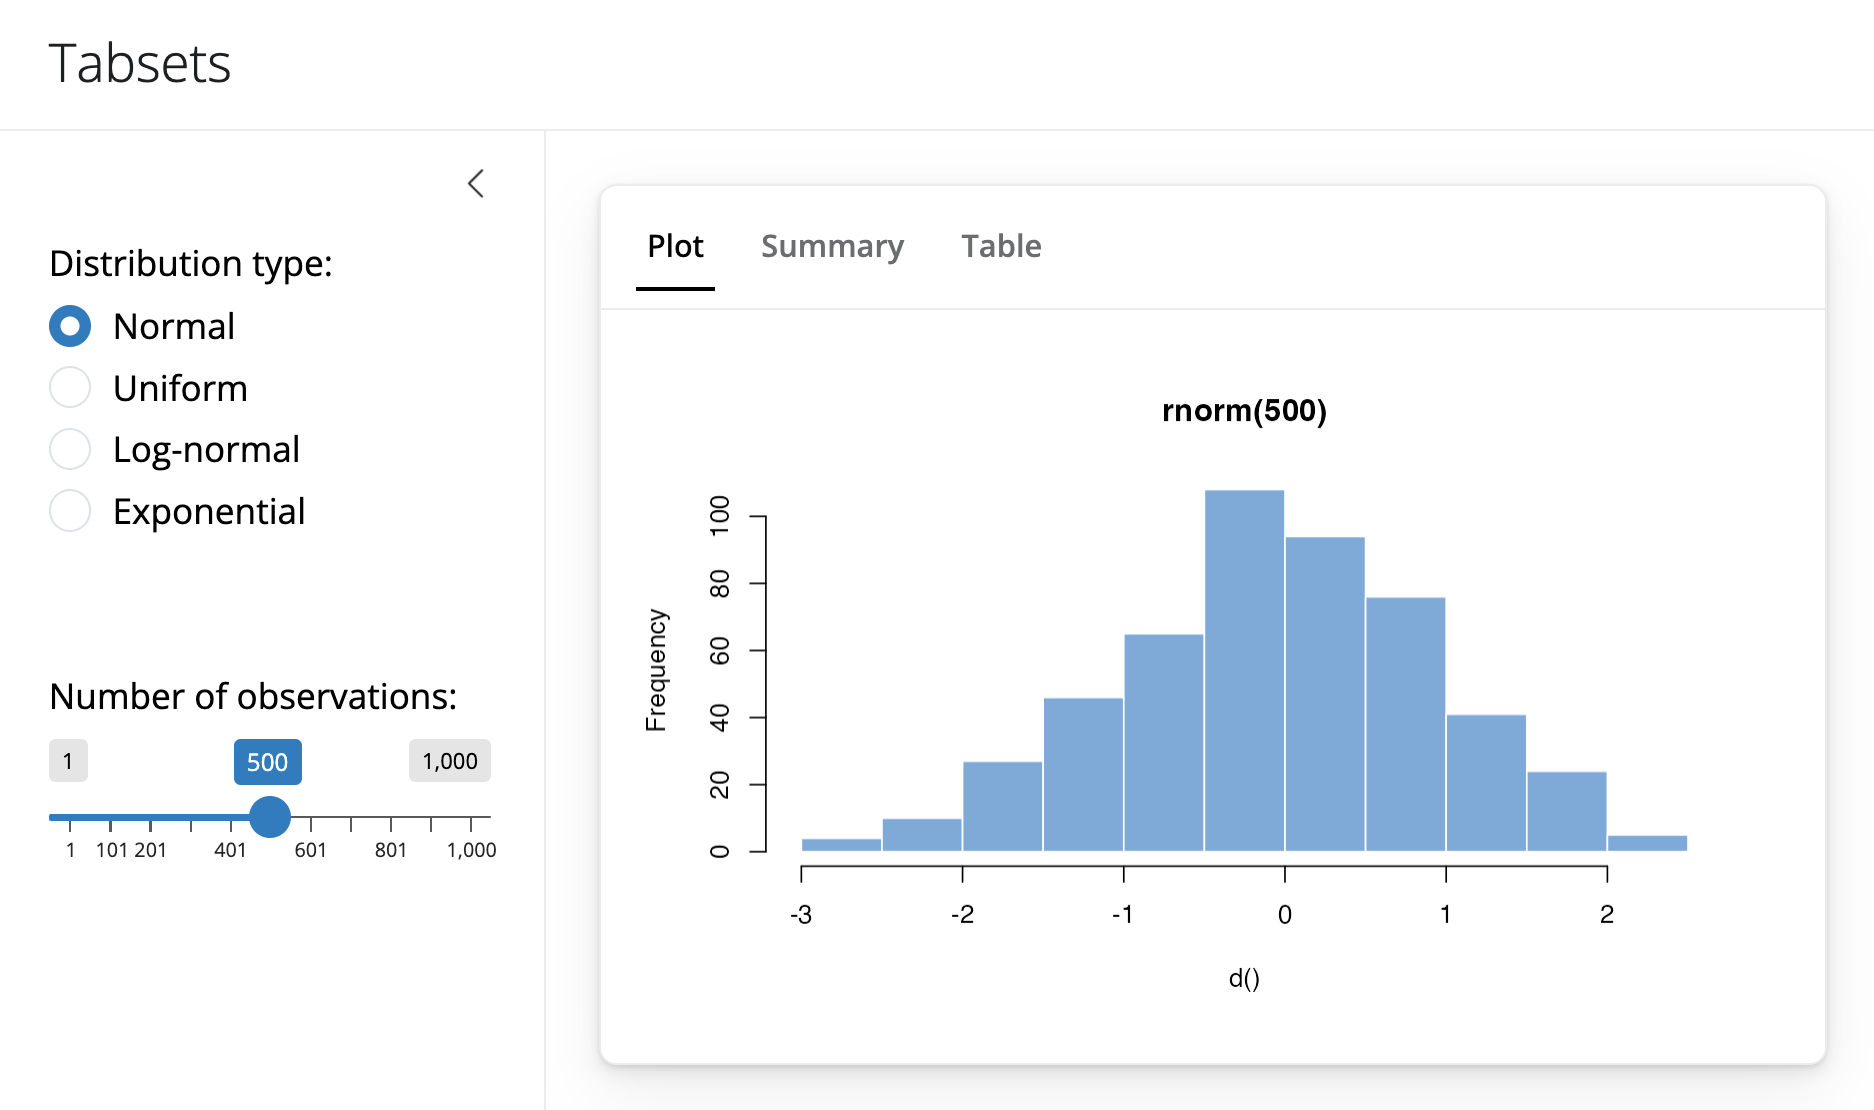 Shiny app with Tabsets on the left with radio buttons for Normal, Uniform, Log-normal and Exponential and a slider bar for Number of observations. Panel on the right is a histogram plot as the visible tab, and Summary and Table tabs hidden.